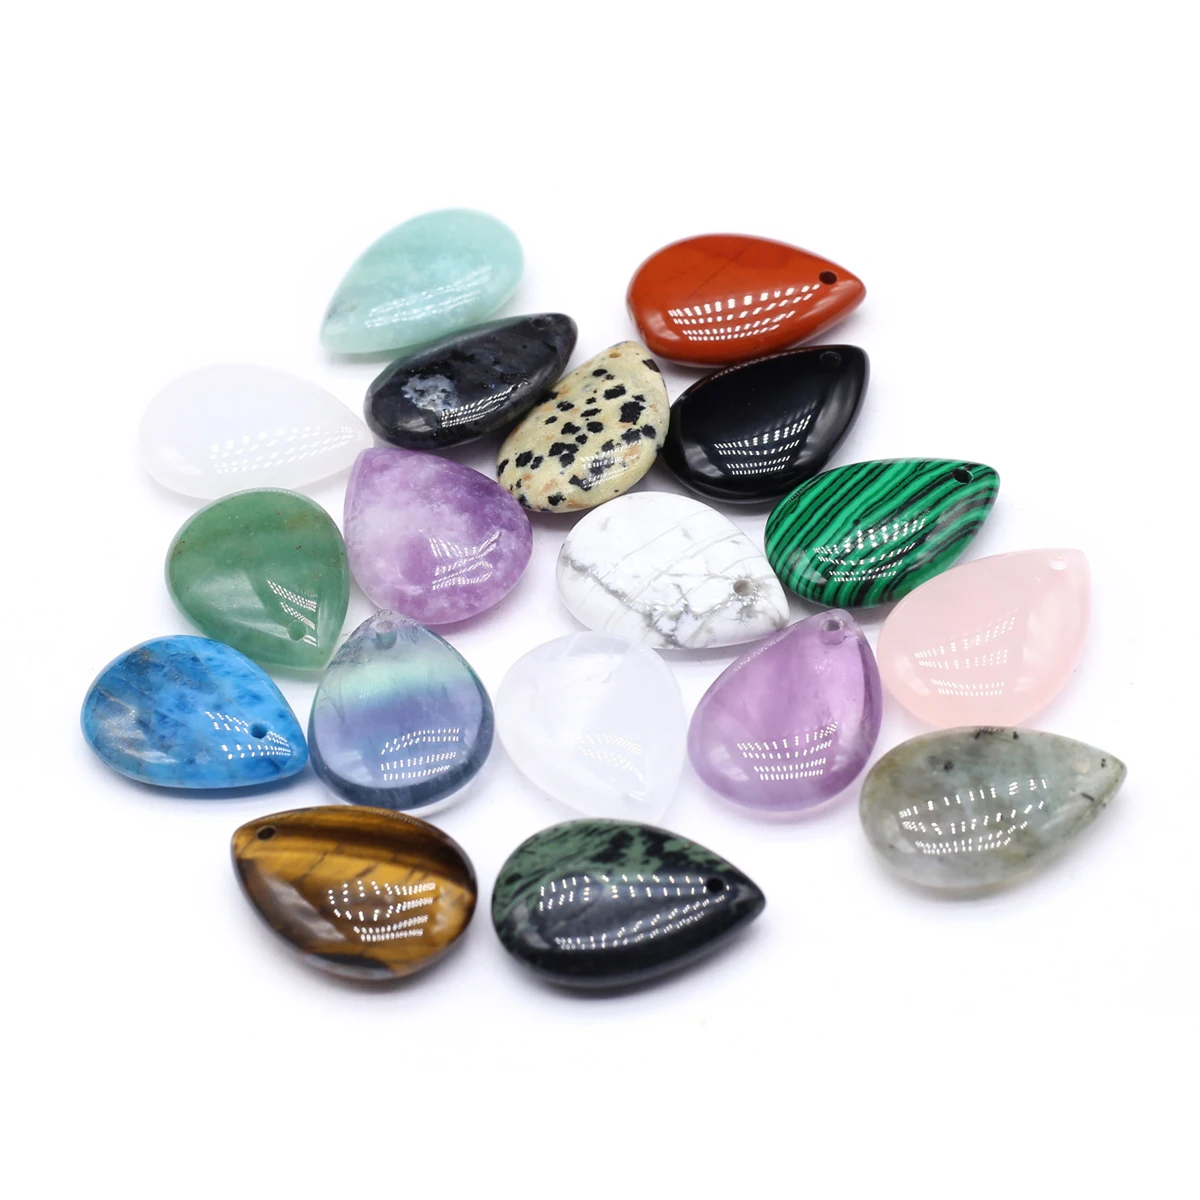 

10 Pcs Water Drop Shape Polished Random Healing Crystal Stone Pendants Agate Charms for Making Jewelry Necklace Gift